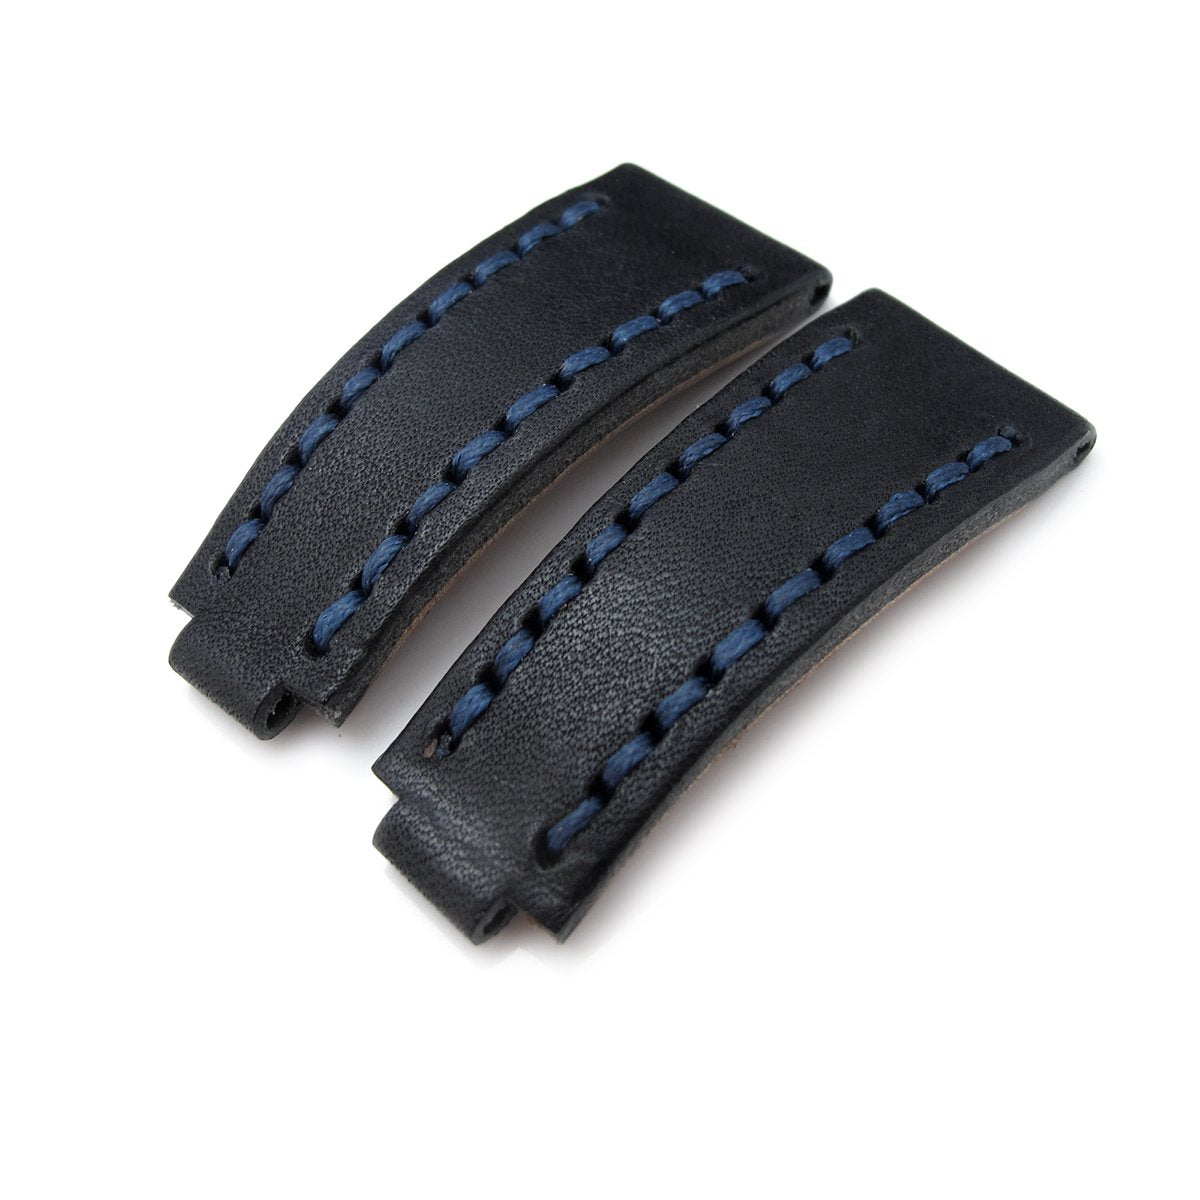 20mm MiLTAT RX Collection Watch Strap NERO Black Genuine Calf Navy Blue St. Tailor-made for RX SUB & EXP Strapcode Watch Bands